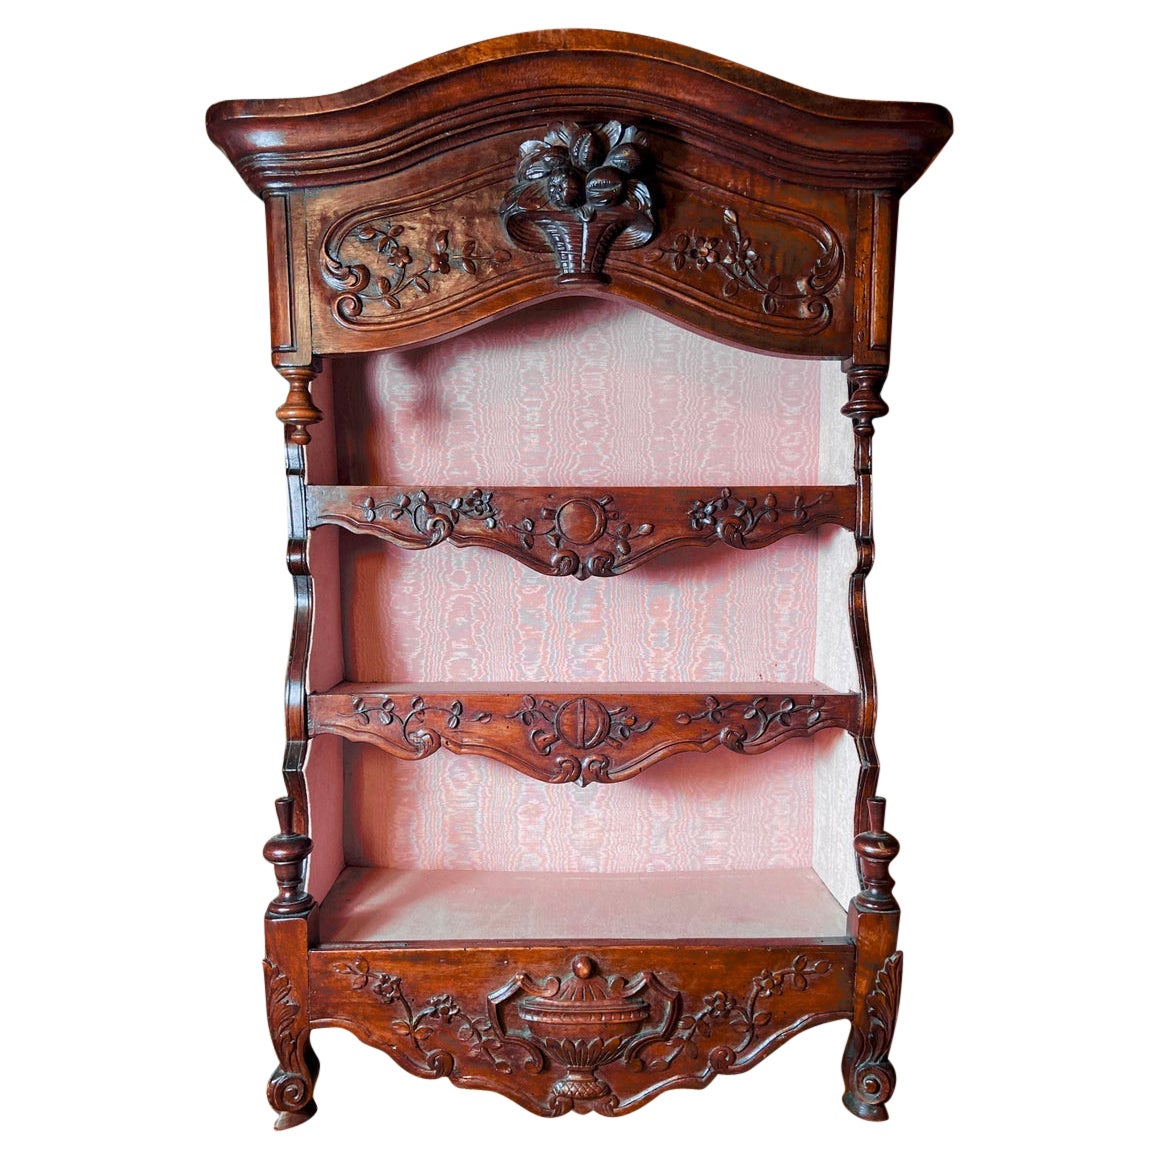 Antique Carved Walnut Wall-Mounted Spice Rack For Sale